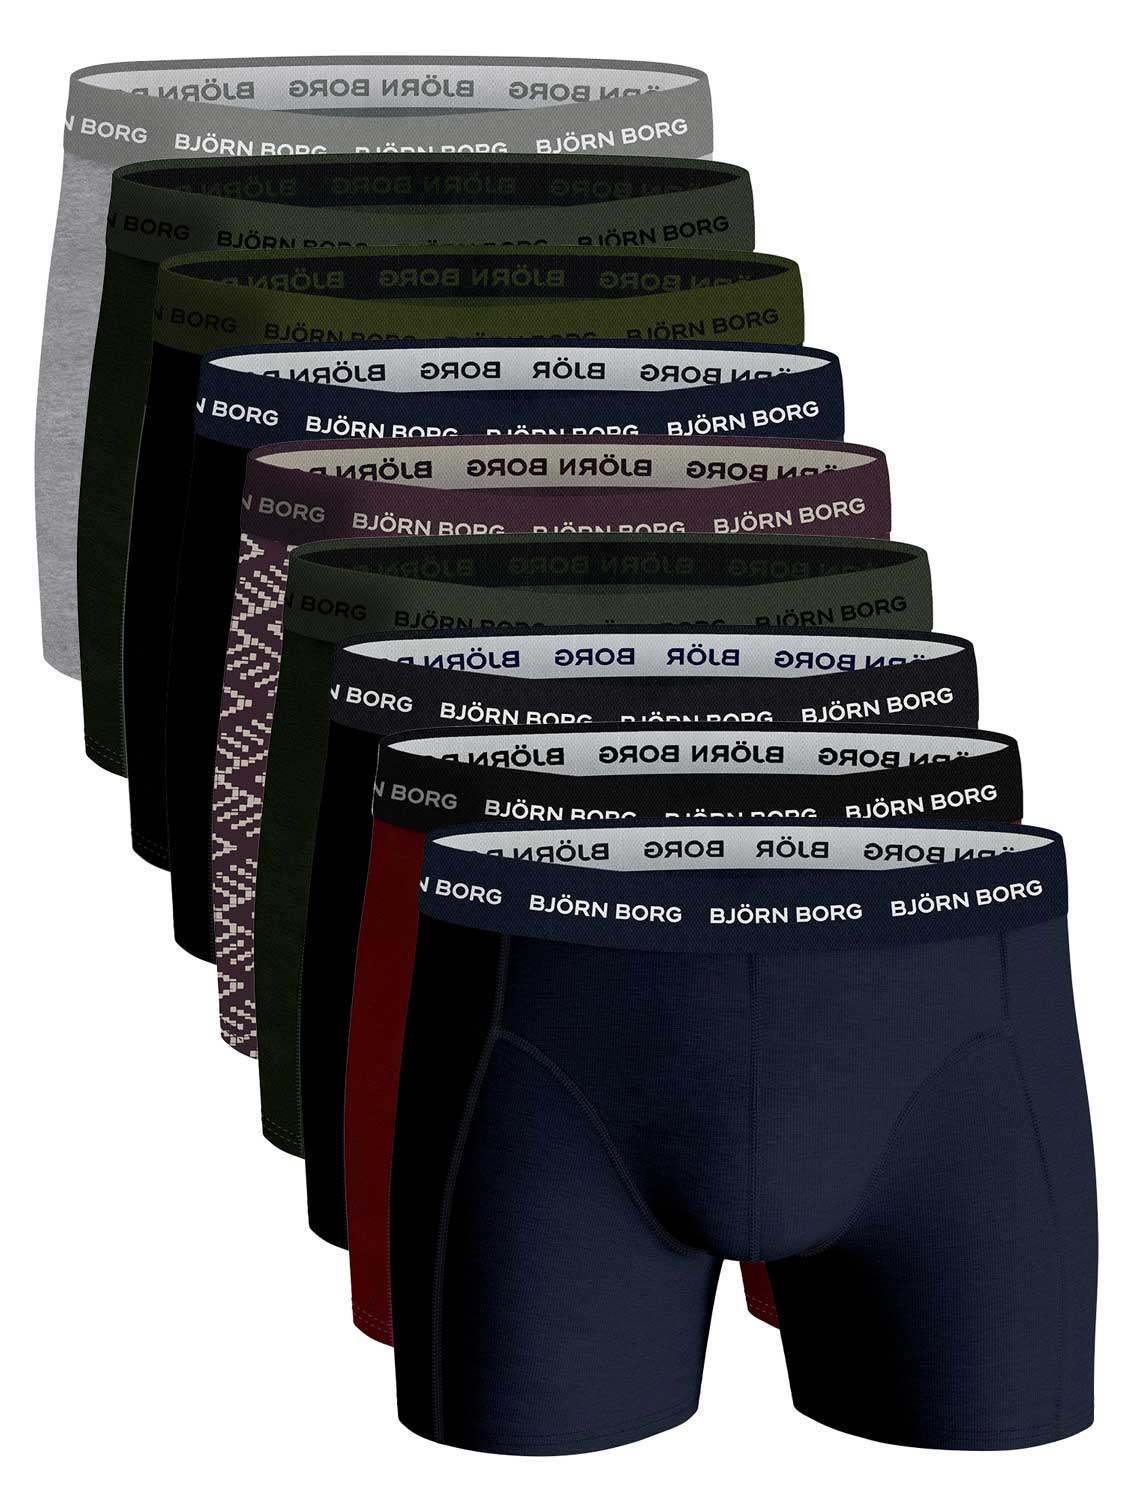 Björn Borg Cotton Stretch boxers - heren boxers normale lengte (9-pack) - multicolor - Maat: XL